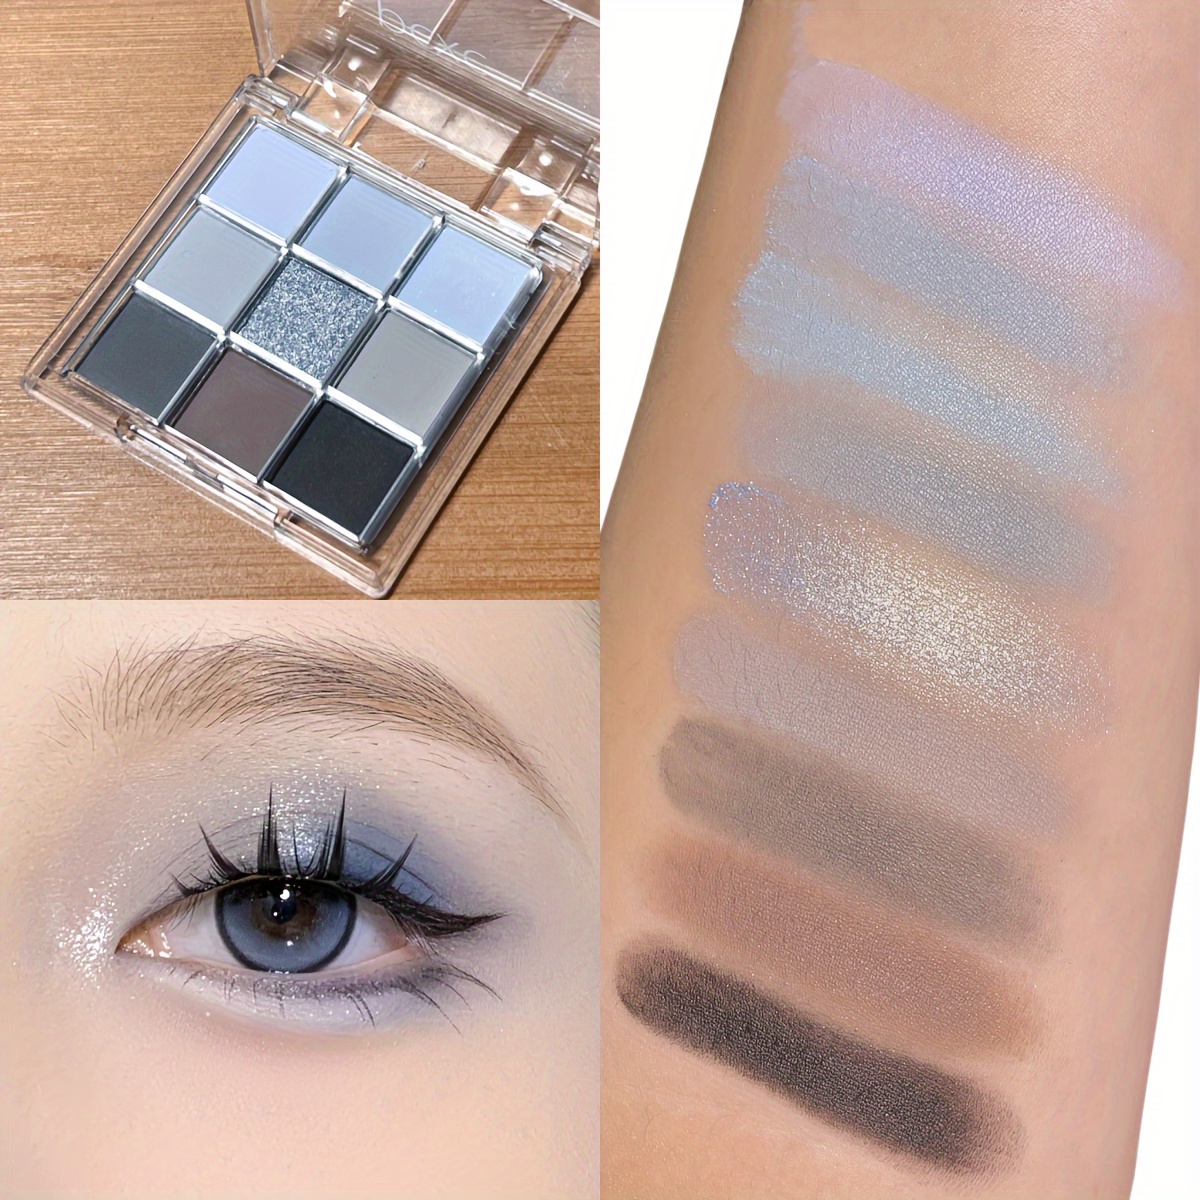 

9-color Eyeshadow Palette, Cool Tones, Matte & Shimmer Glitter Finishes, Compact And Portable Design For On-the-go Touch-ups